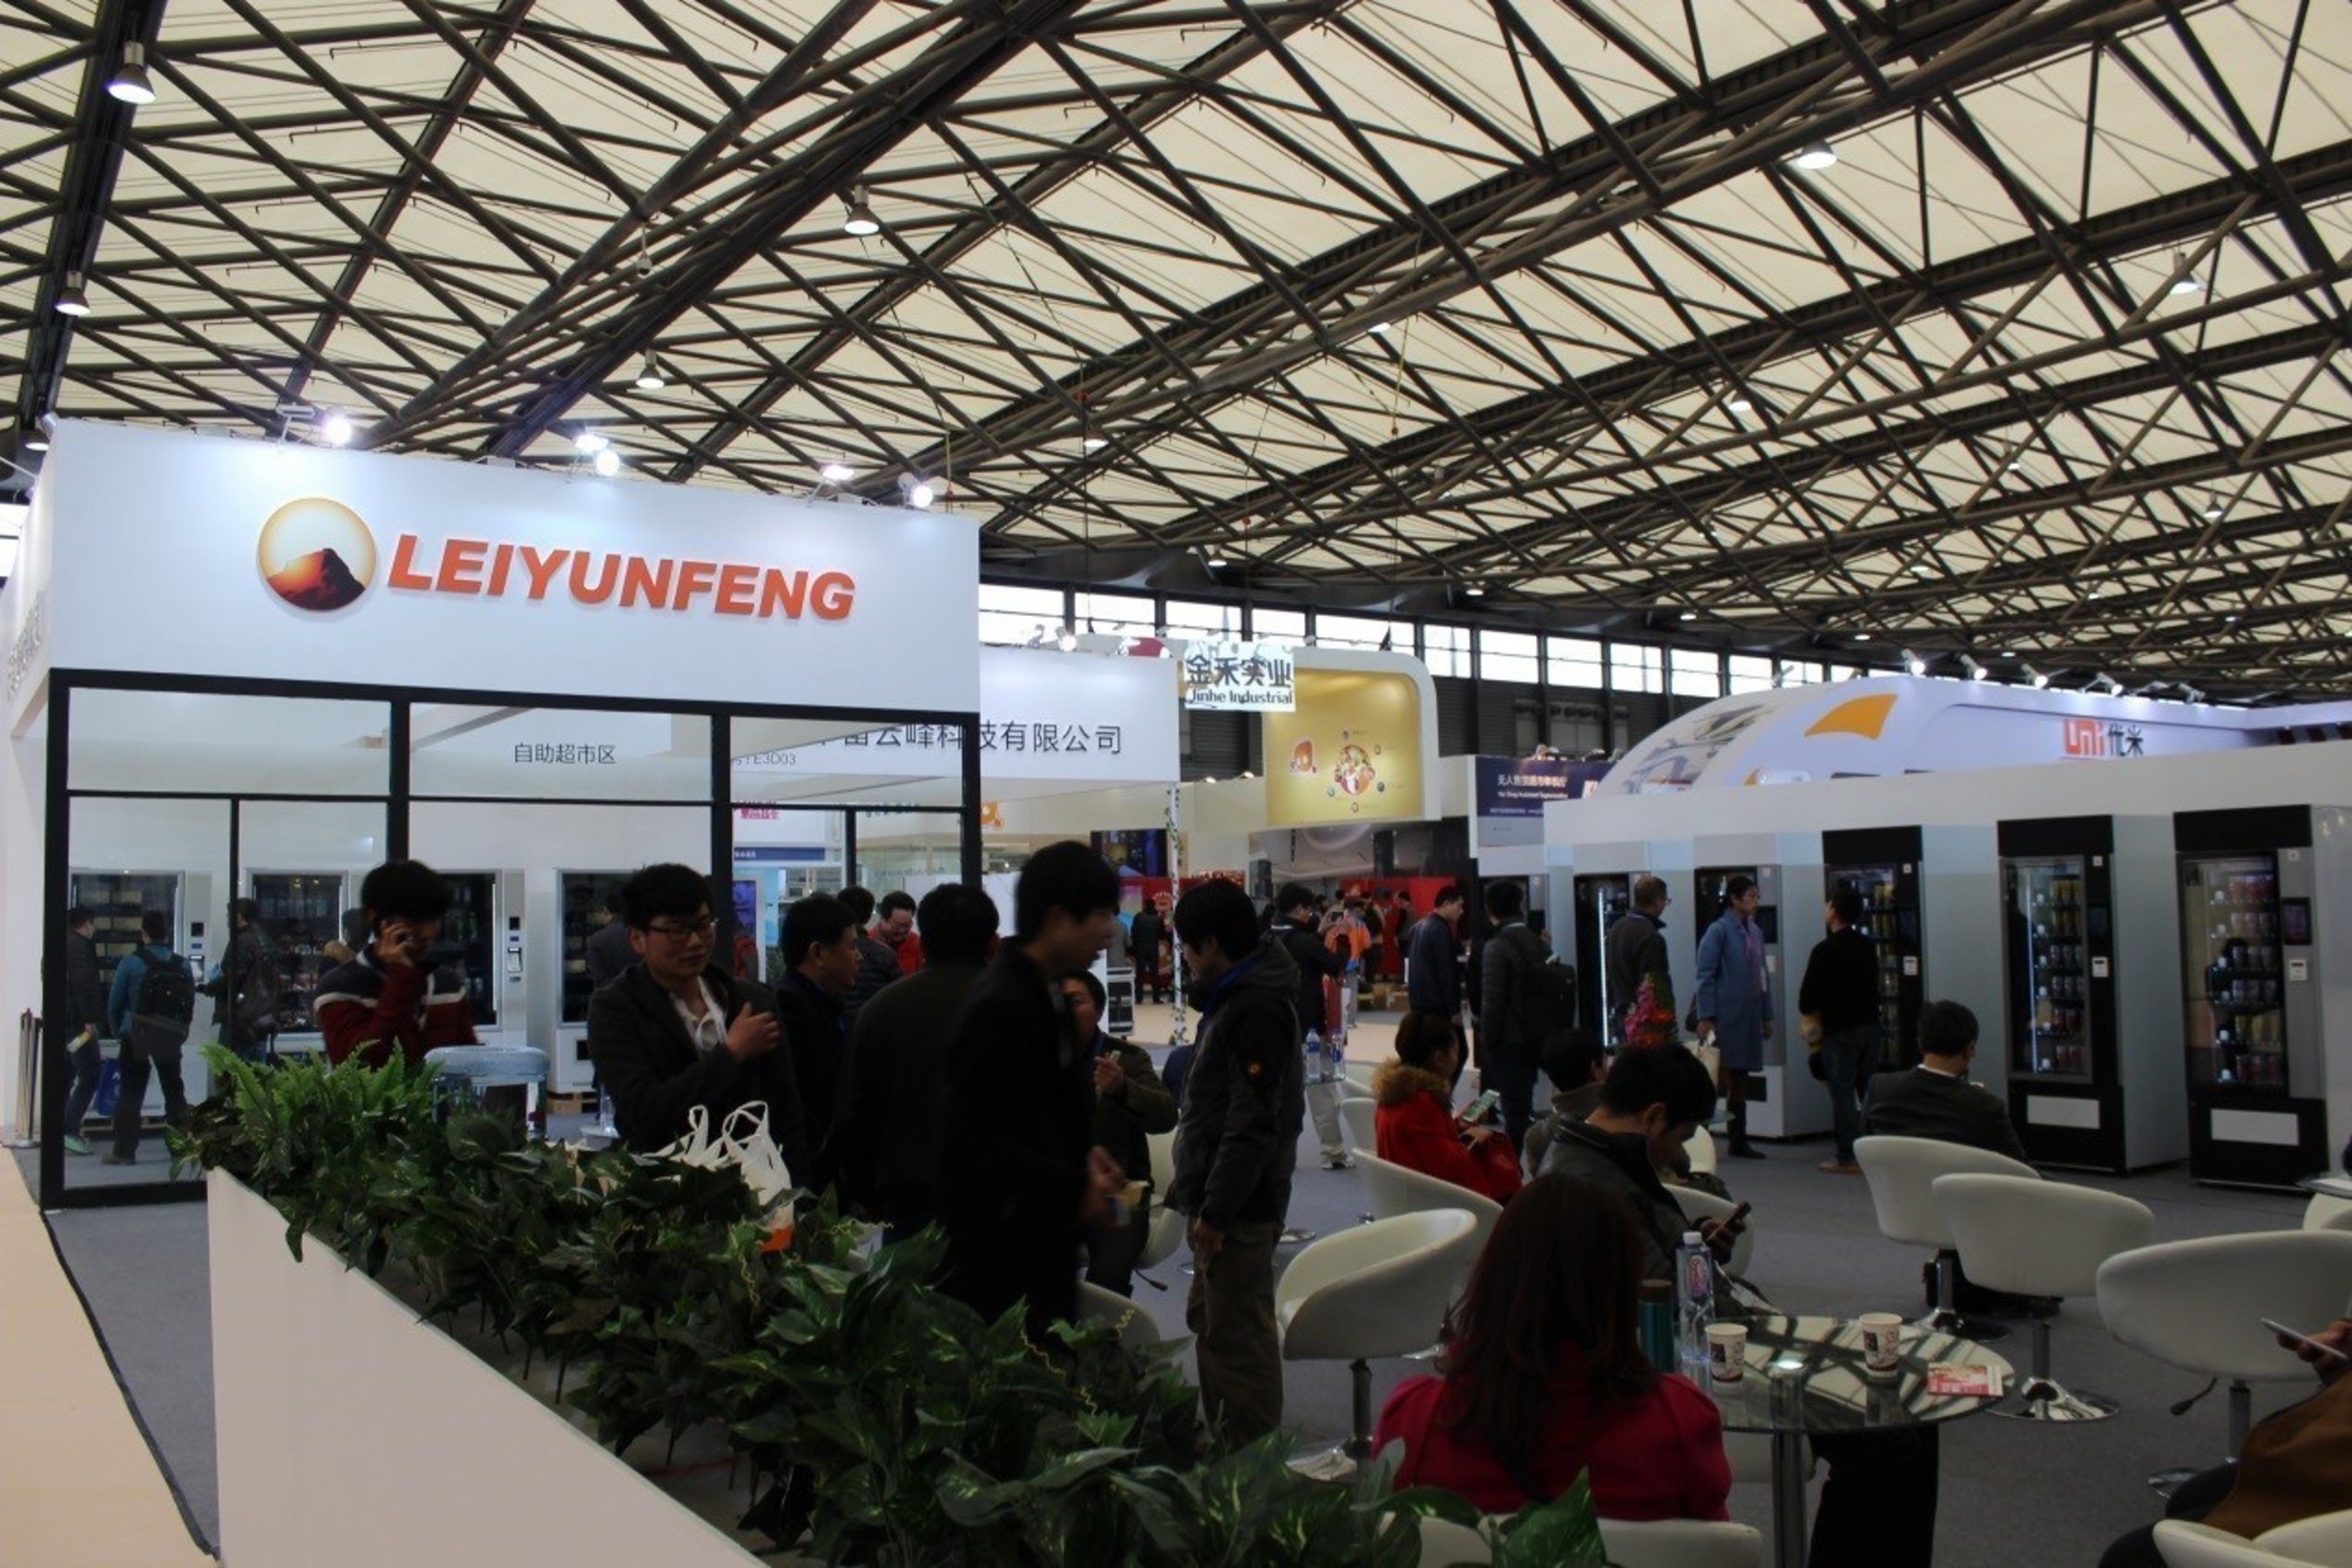 The 13th China International Self-service, Kiosk and Vending Show